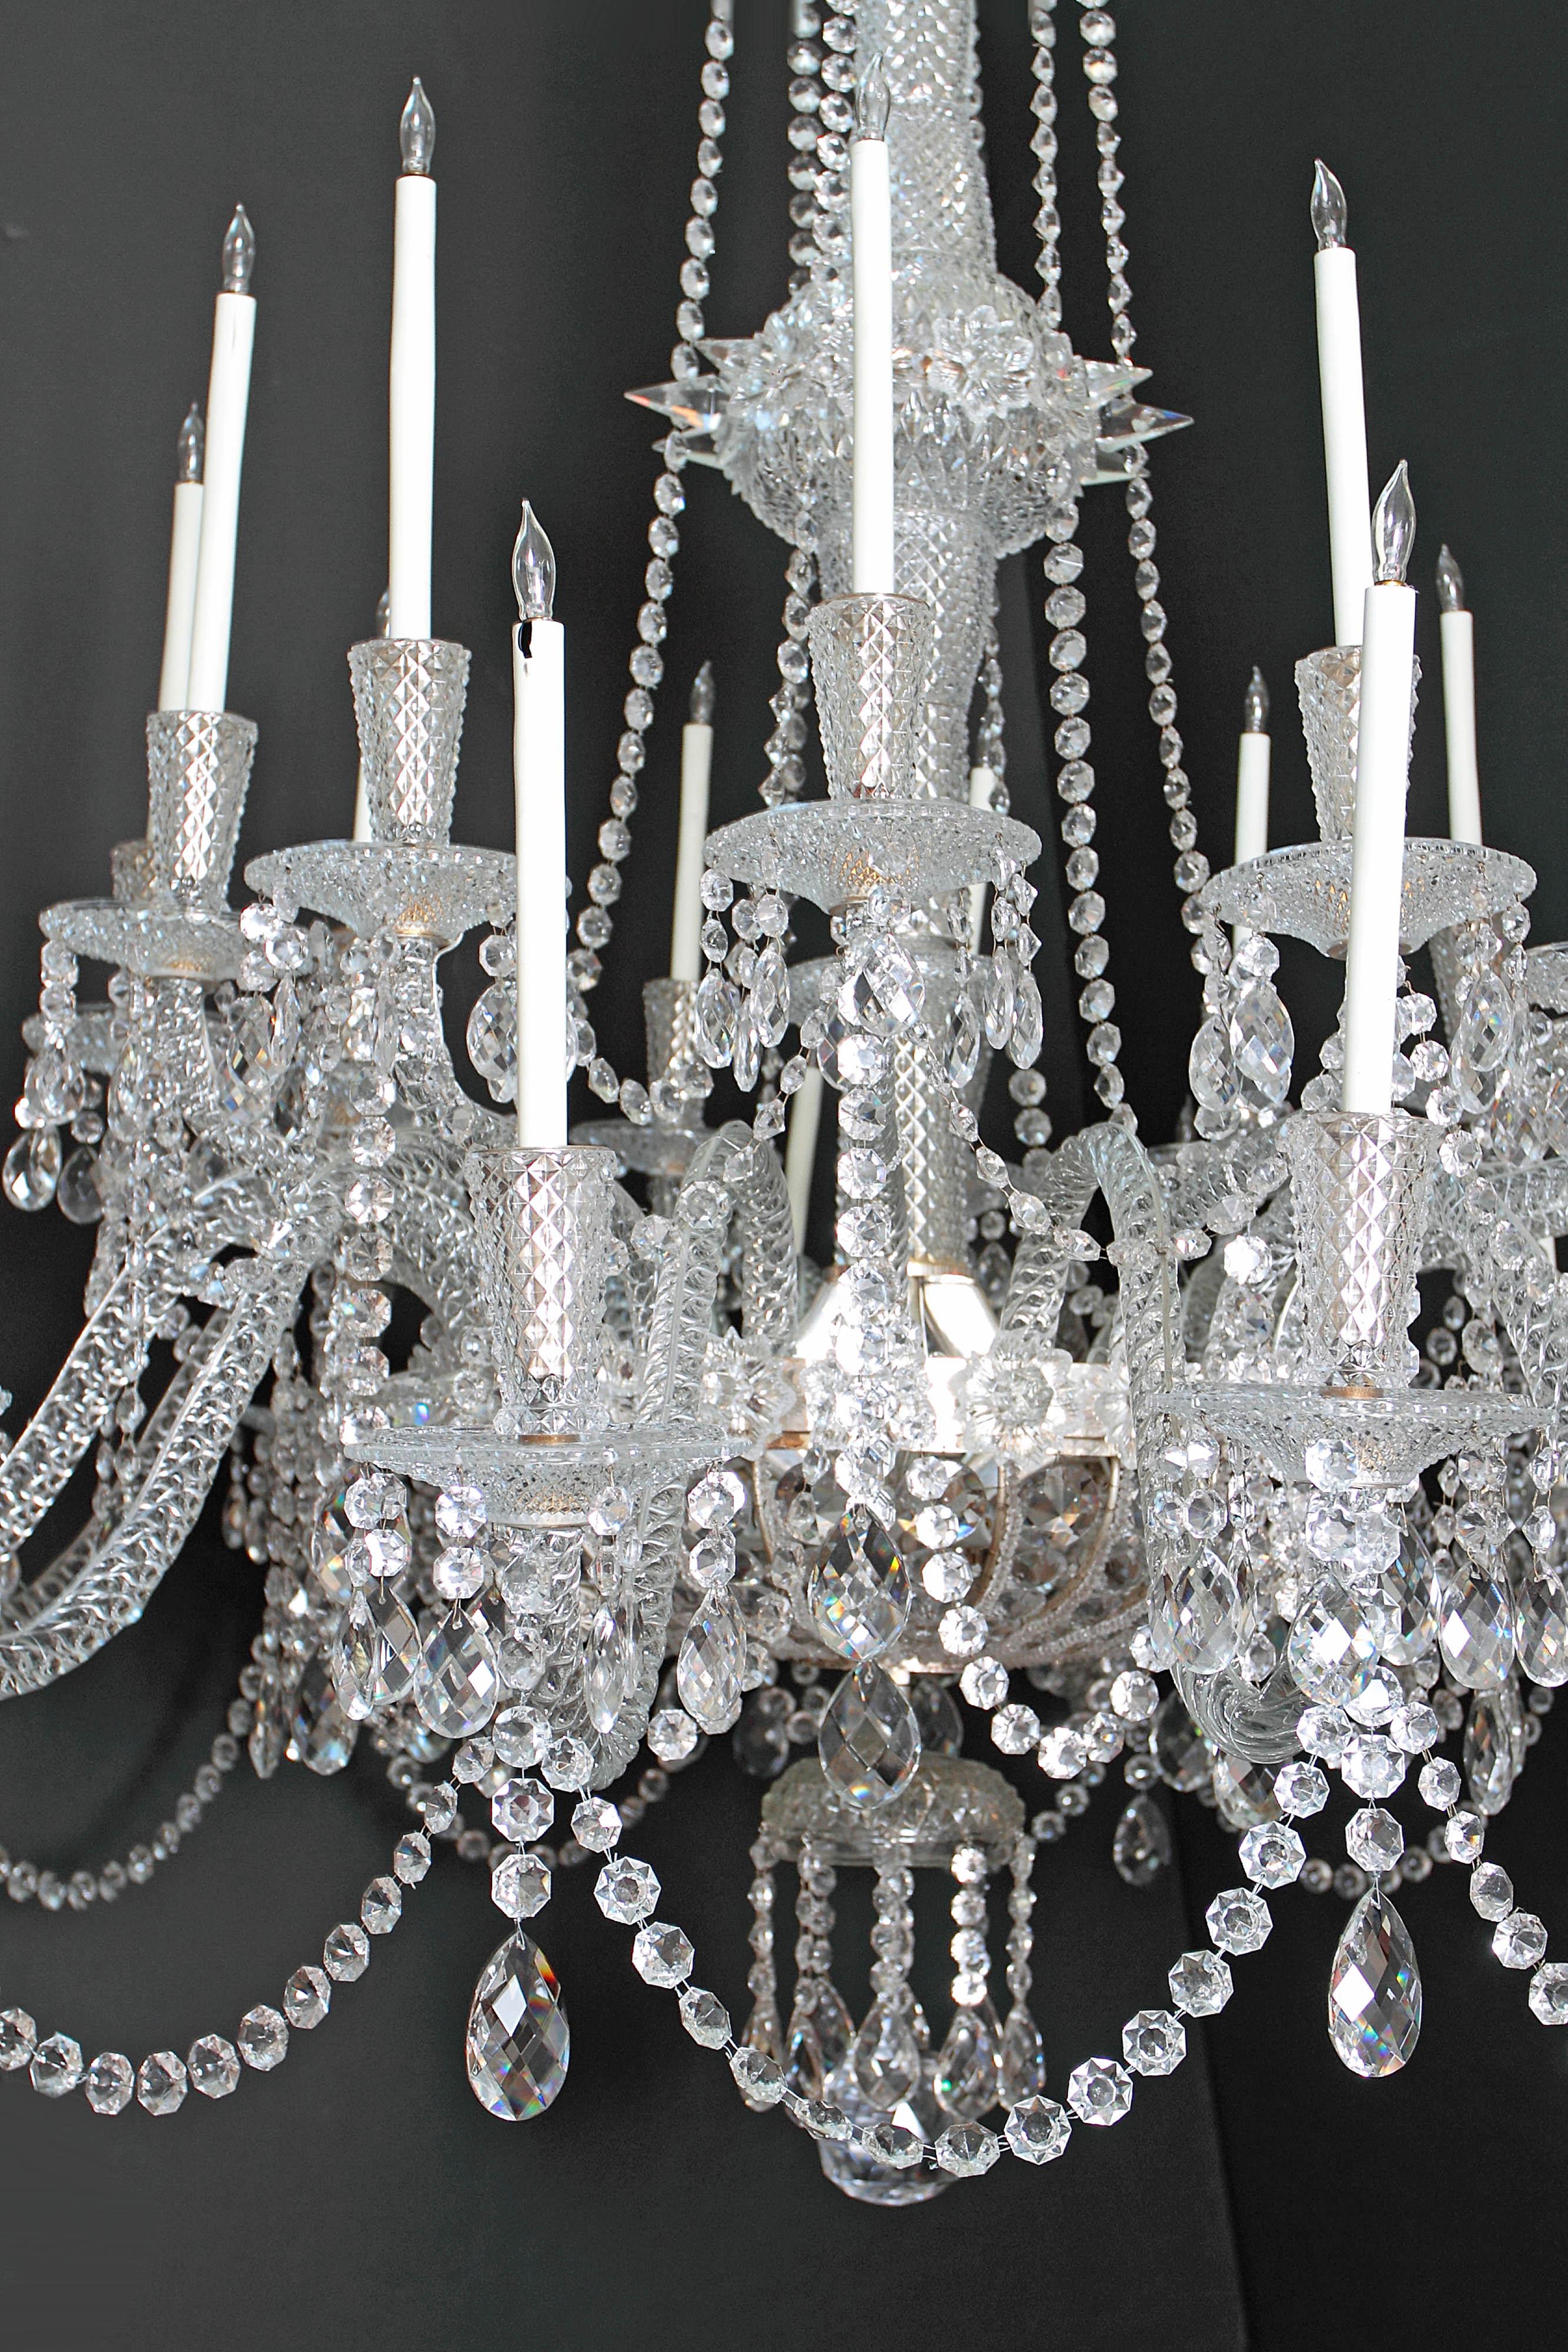 Pair of Grand Scale Mid-Victorian 24-Light Cut-Crystal Chandeliers For Sale 8